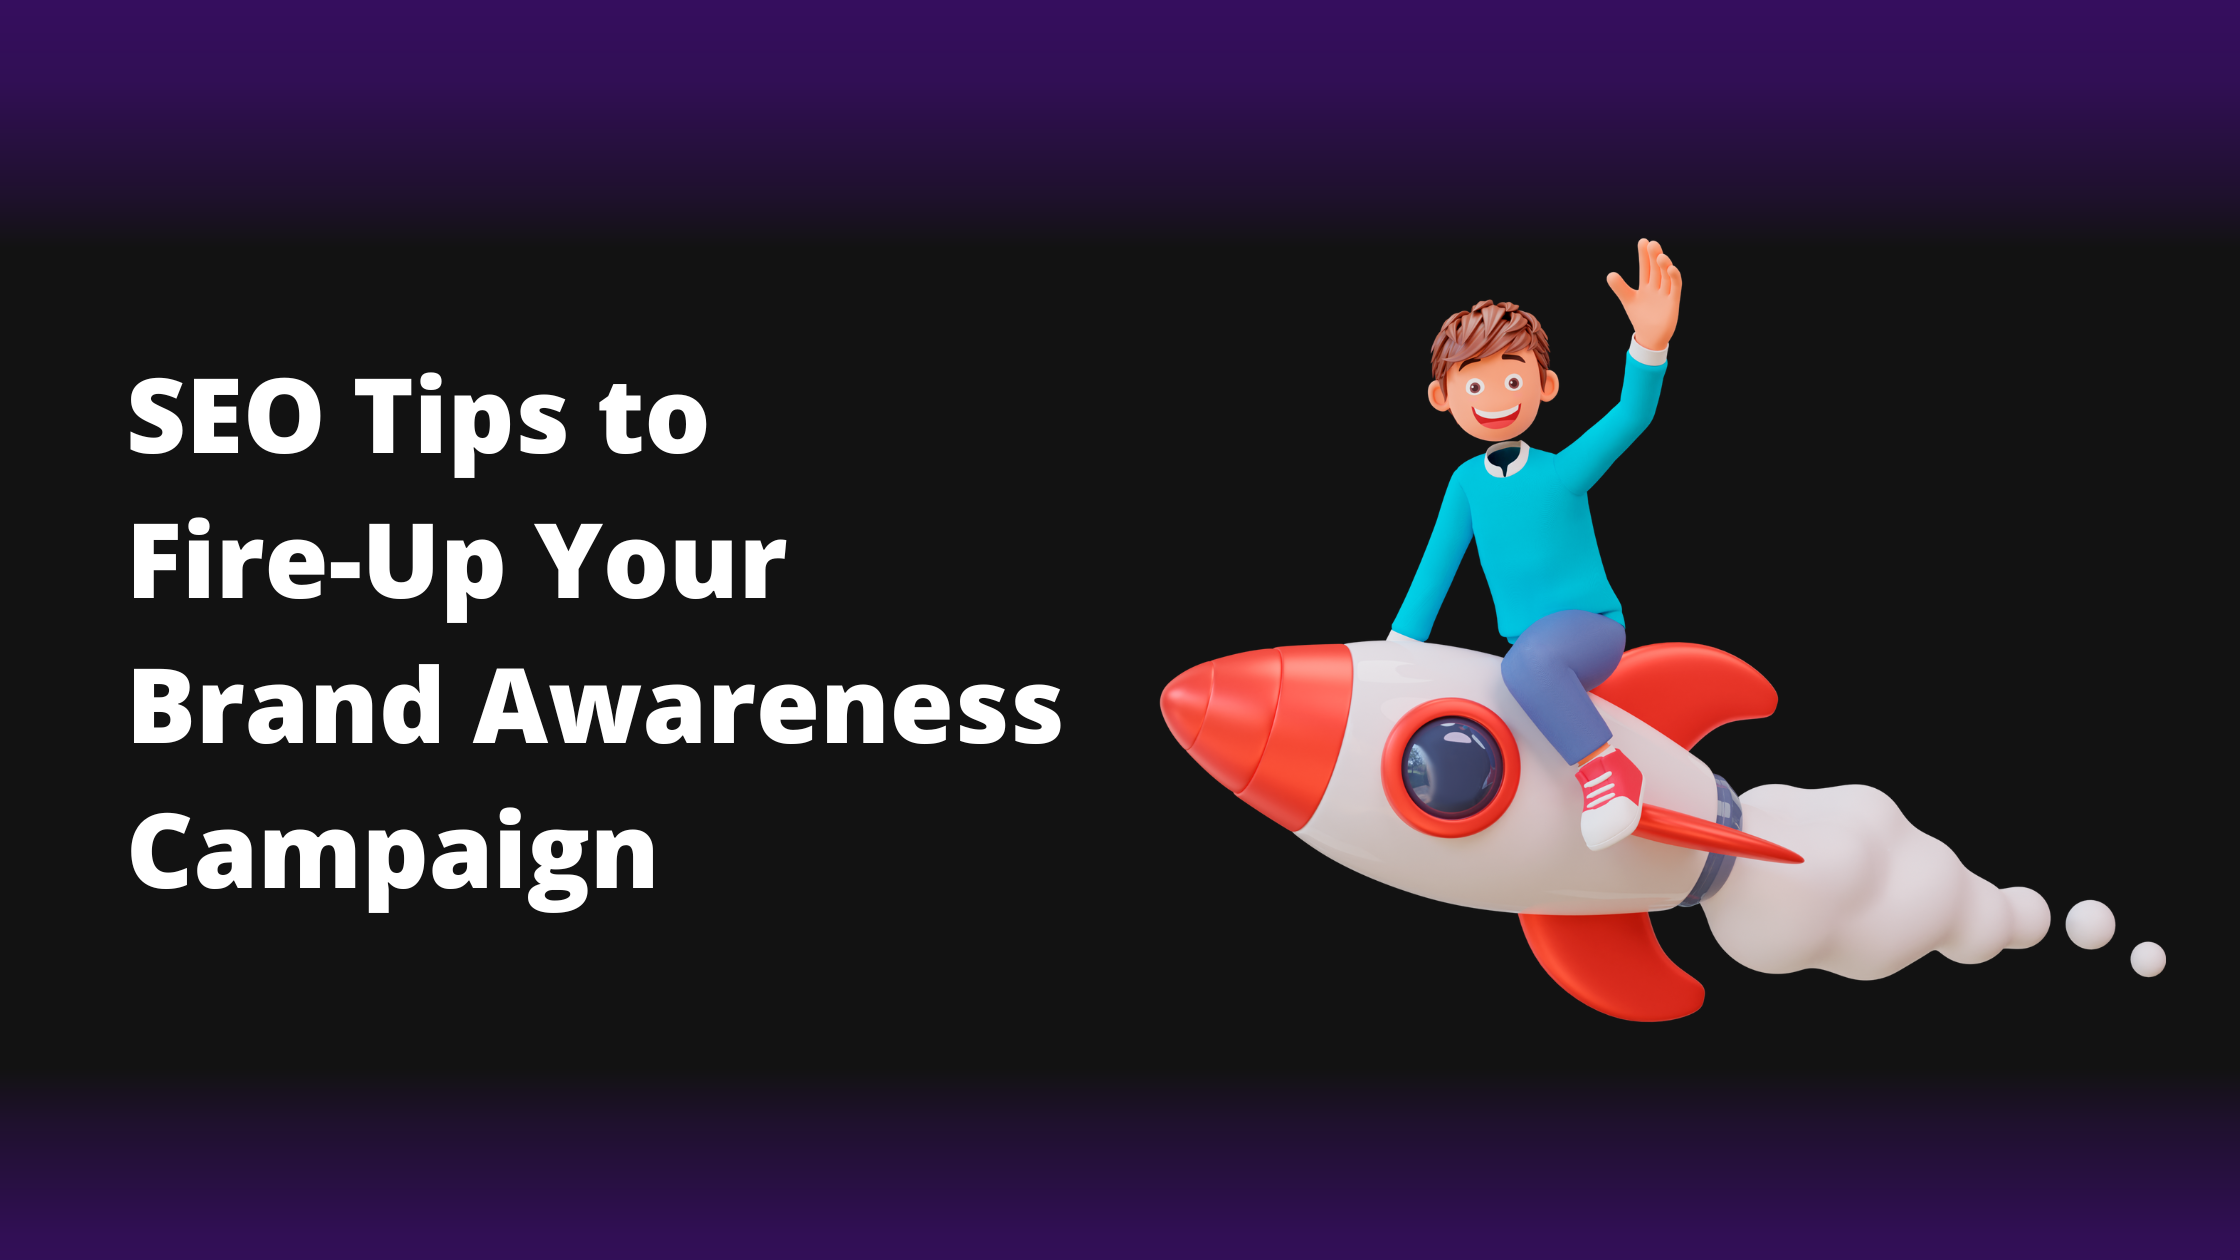 SEO Can Fire-Up Your Brand Awareness Campaign If You Do This 